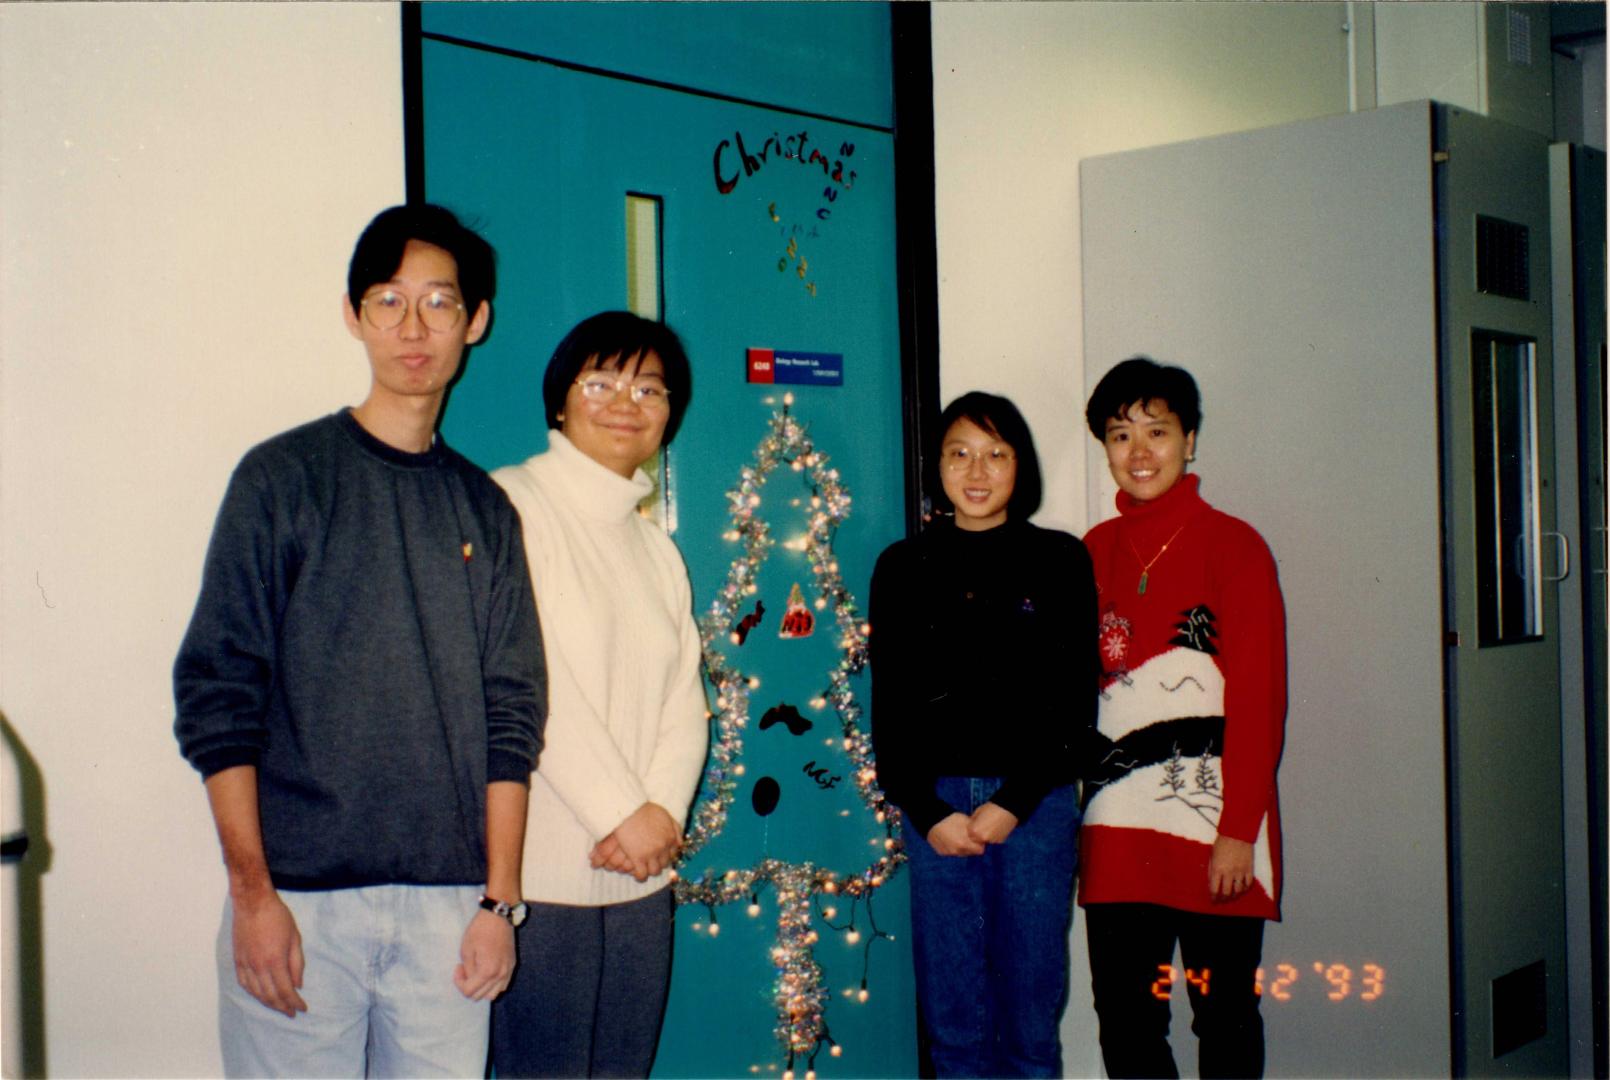 Prof. Ip (First right) celebrates first Christmas at HKUST in 1993 in front of her laboratory with her research team members, some of whom are still her aide to date.